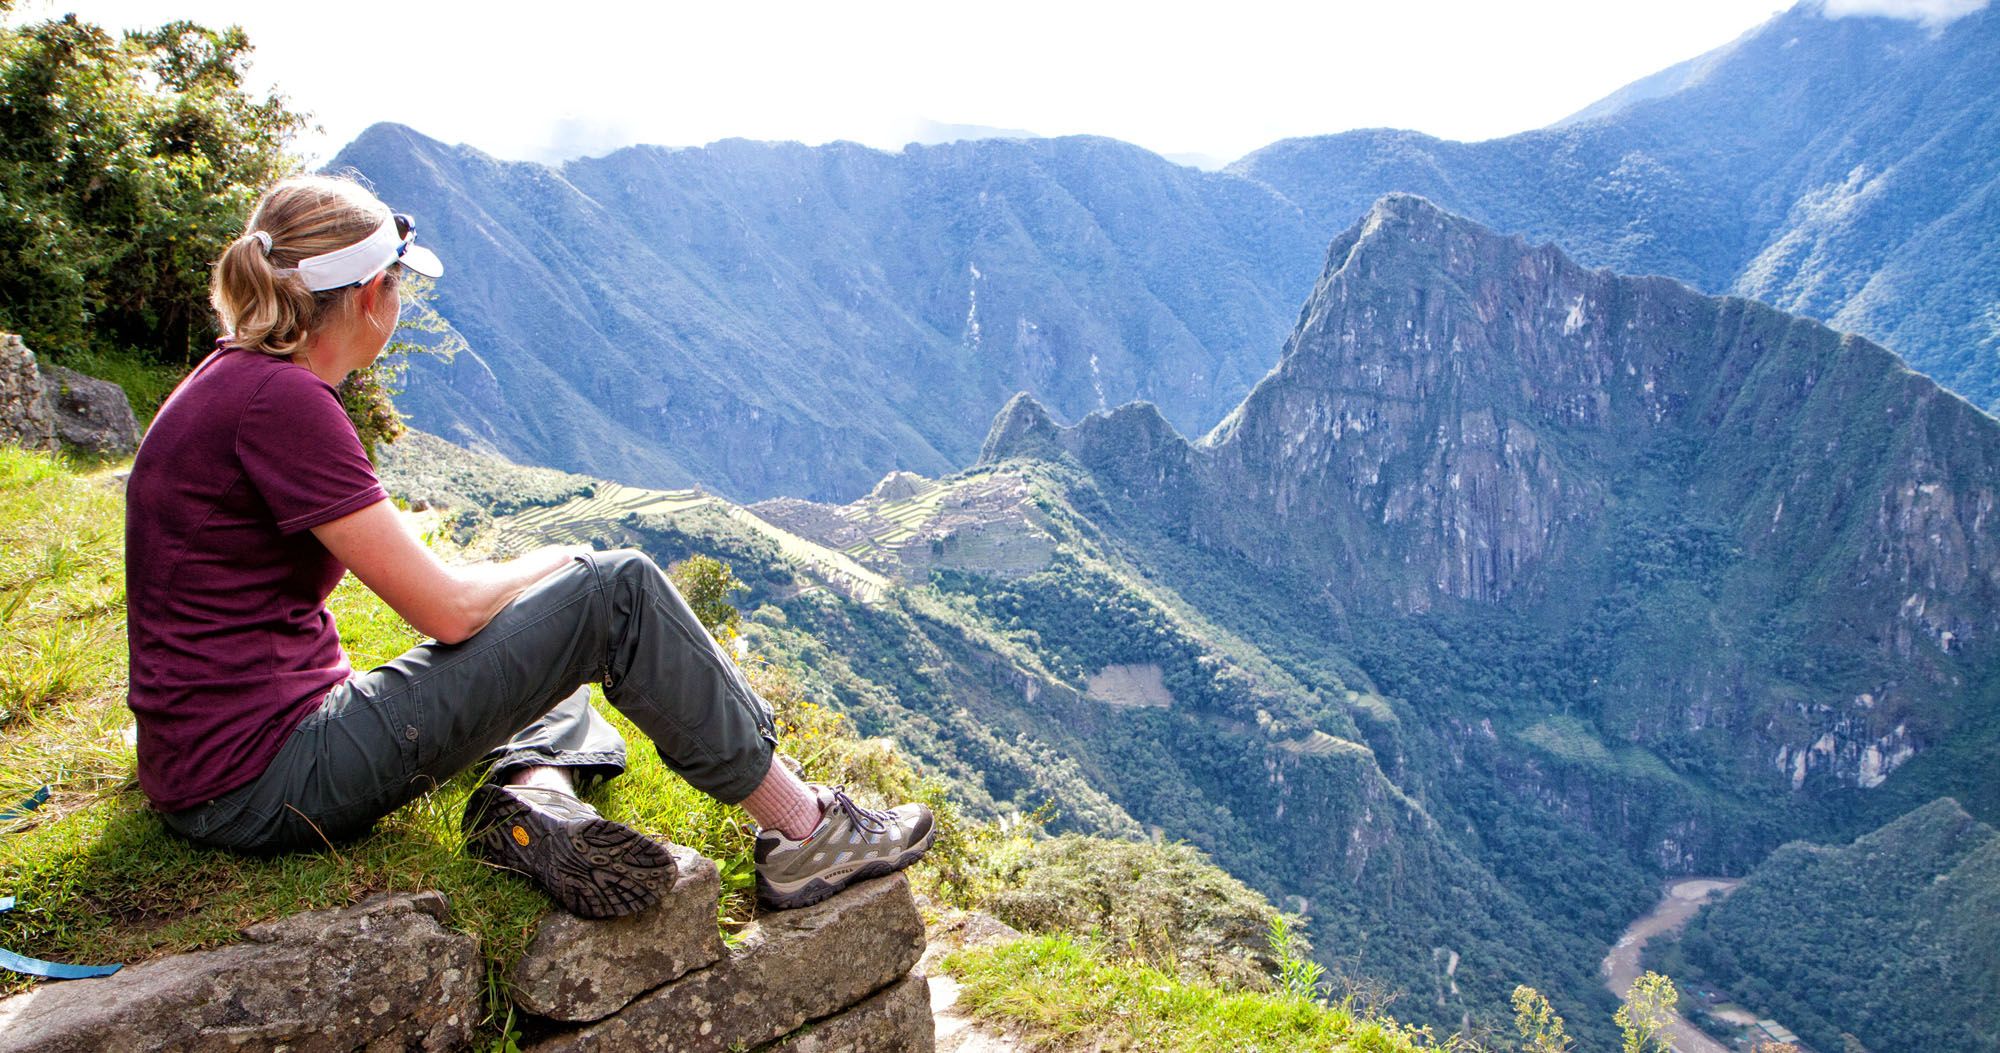 Featured image for “Hiking to Machu Picchu Along the Inca Trail”